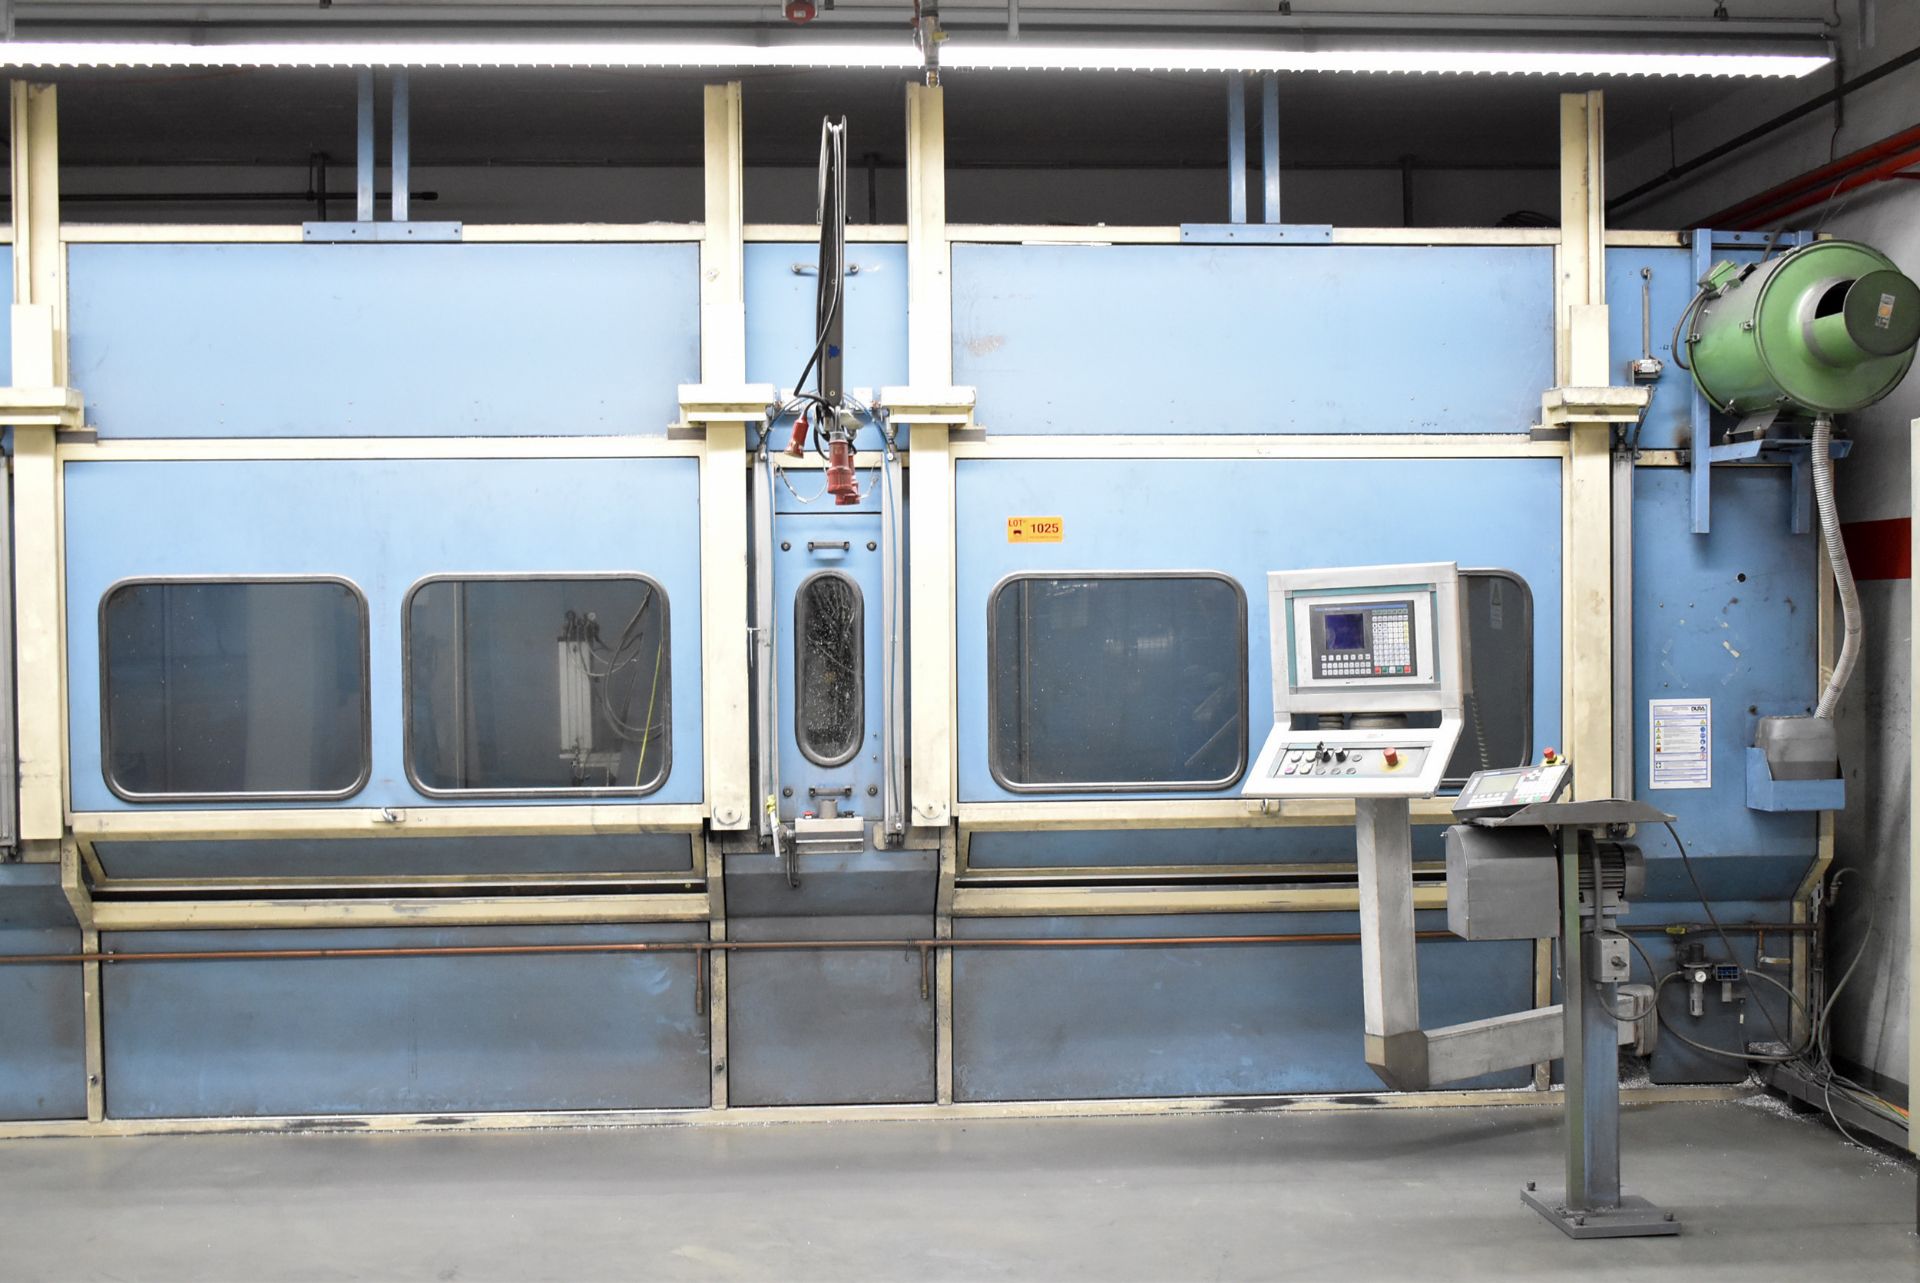 MAKA 7 AXIS CNC MACHINING CENTER WITH SIEMENS SINEUMERIK TOUCH SCREEN CNC CONTROL, FULL SOUNDPROOF - Image 2 of 9